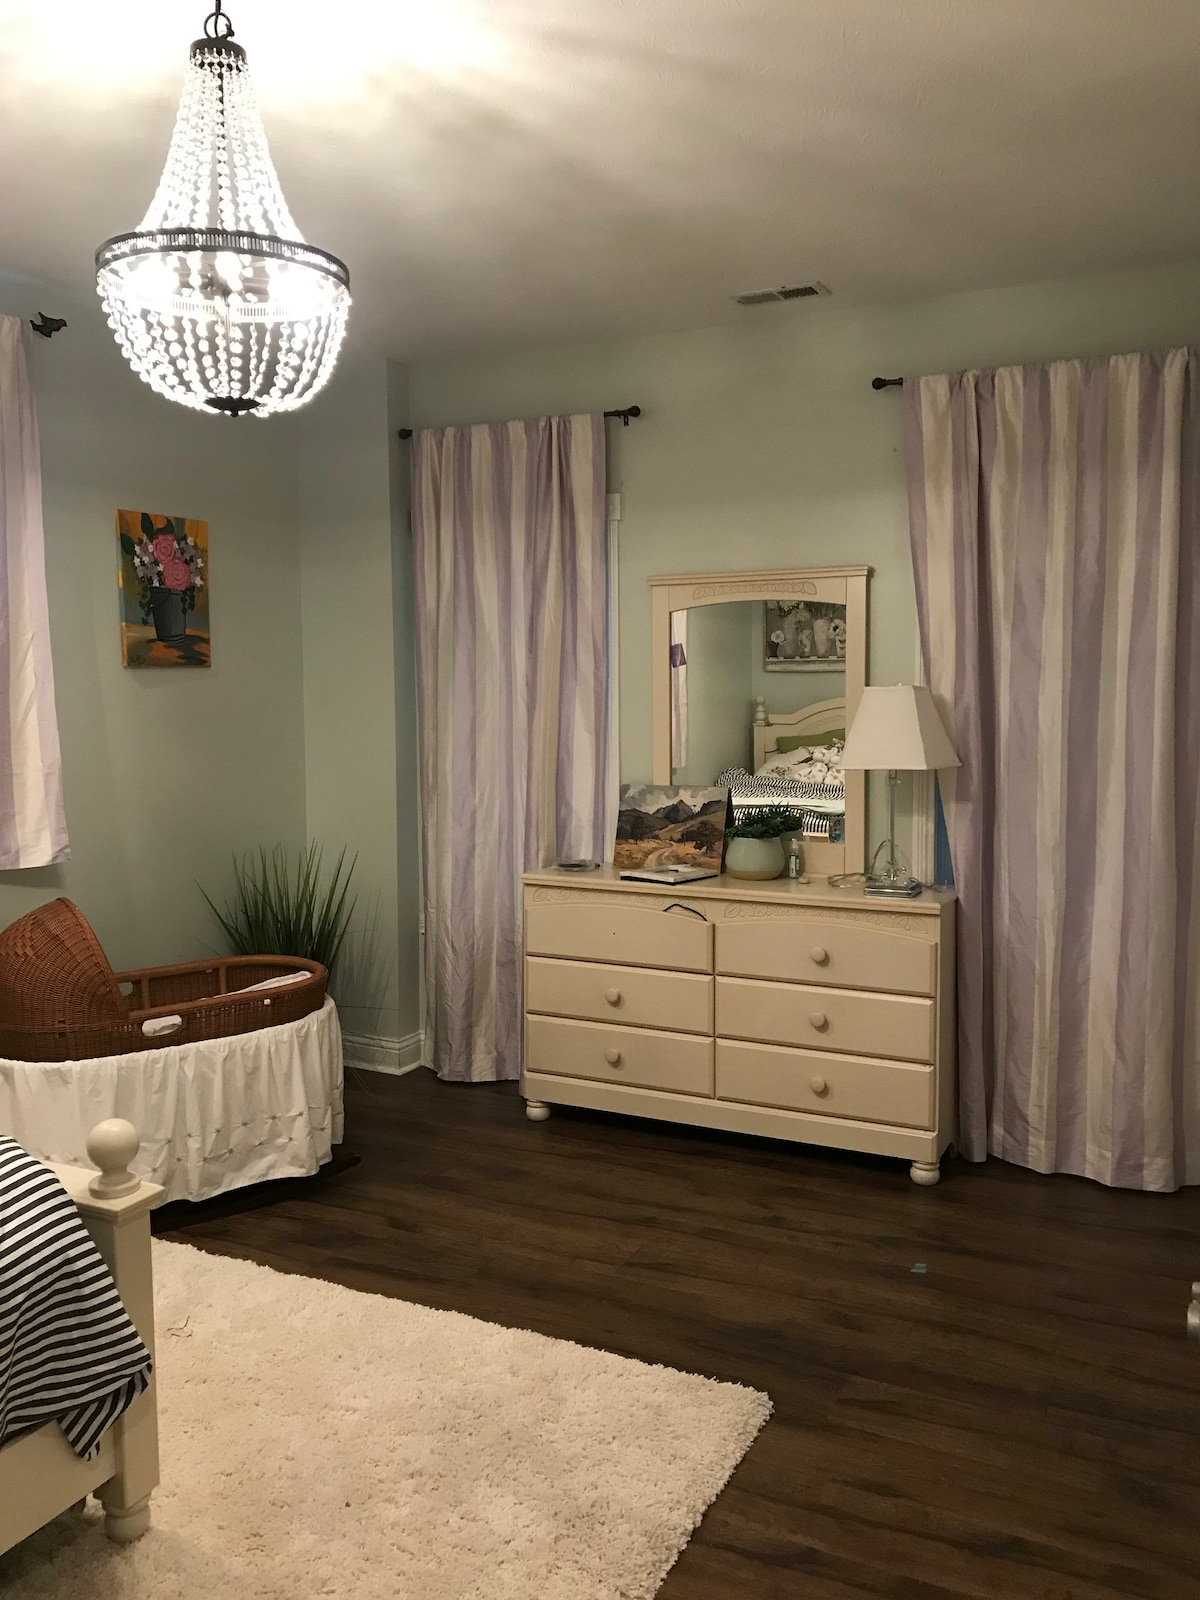 Comfy room w bathroom kitchen exercise near Indy!